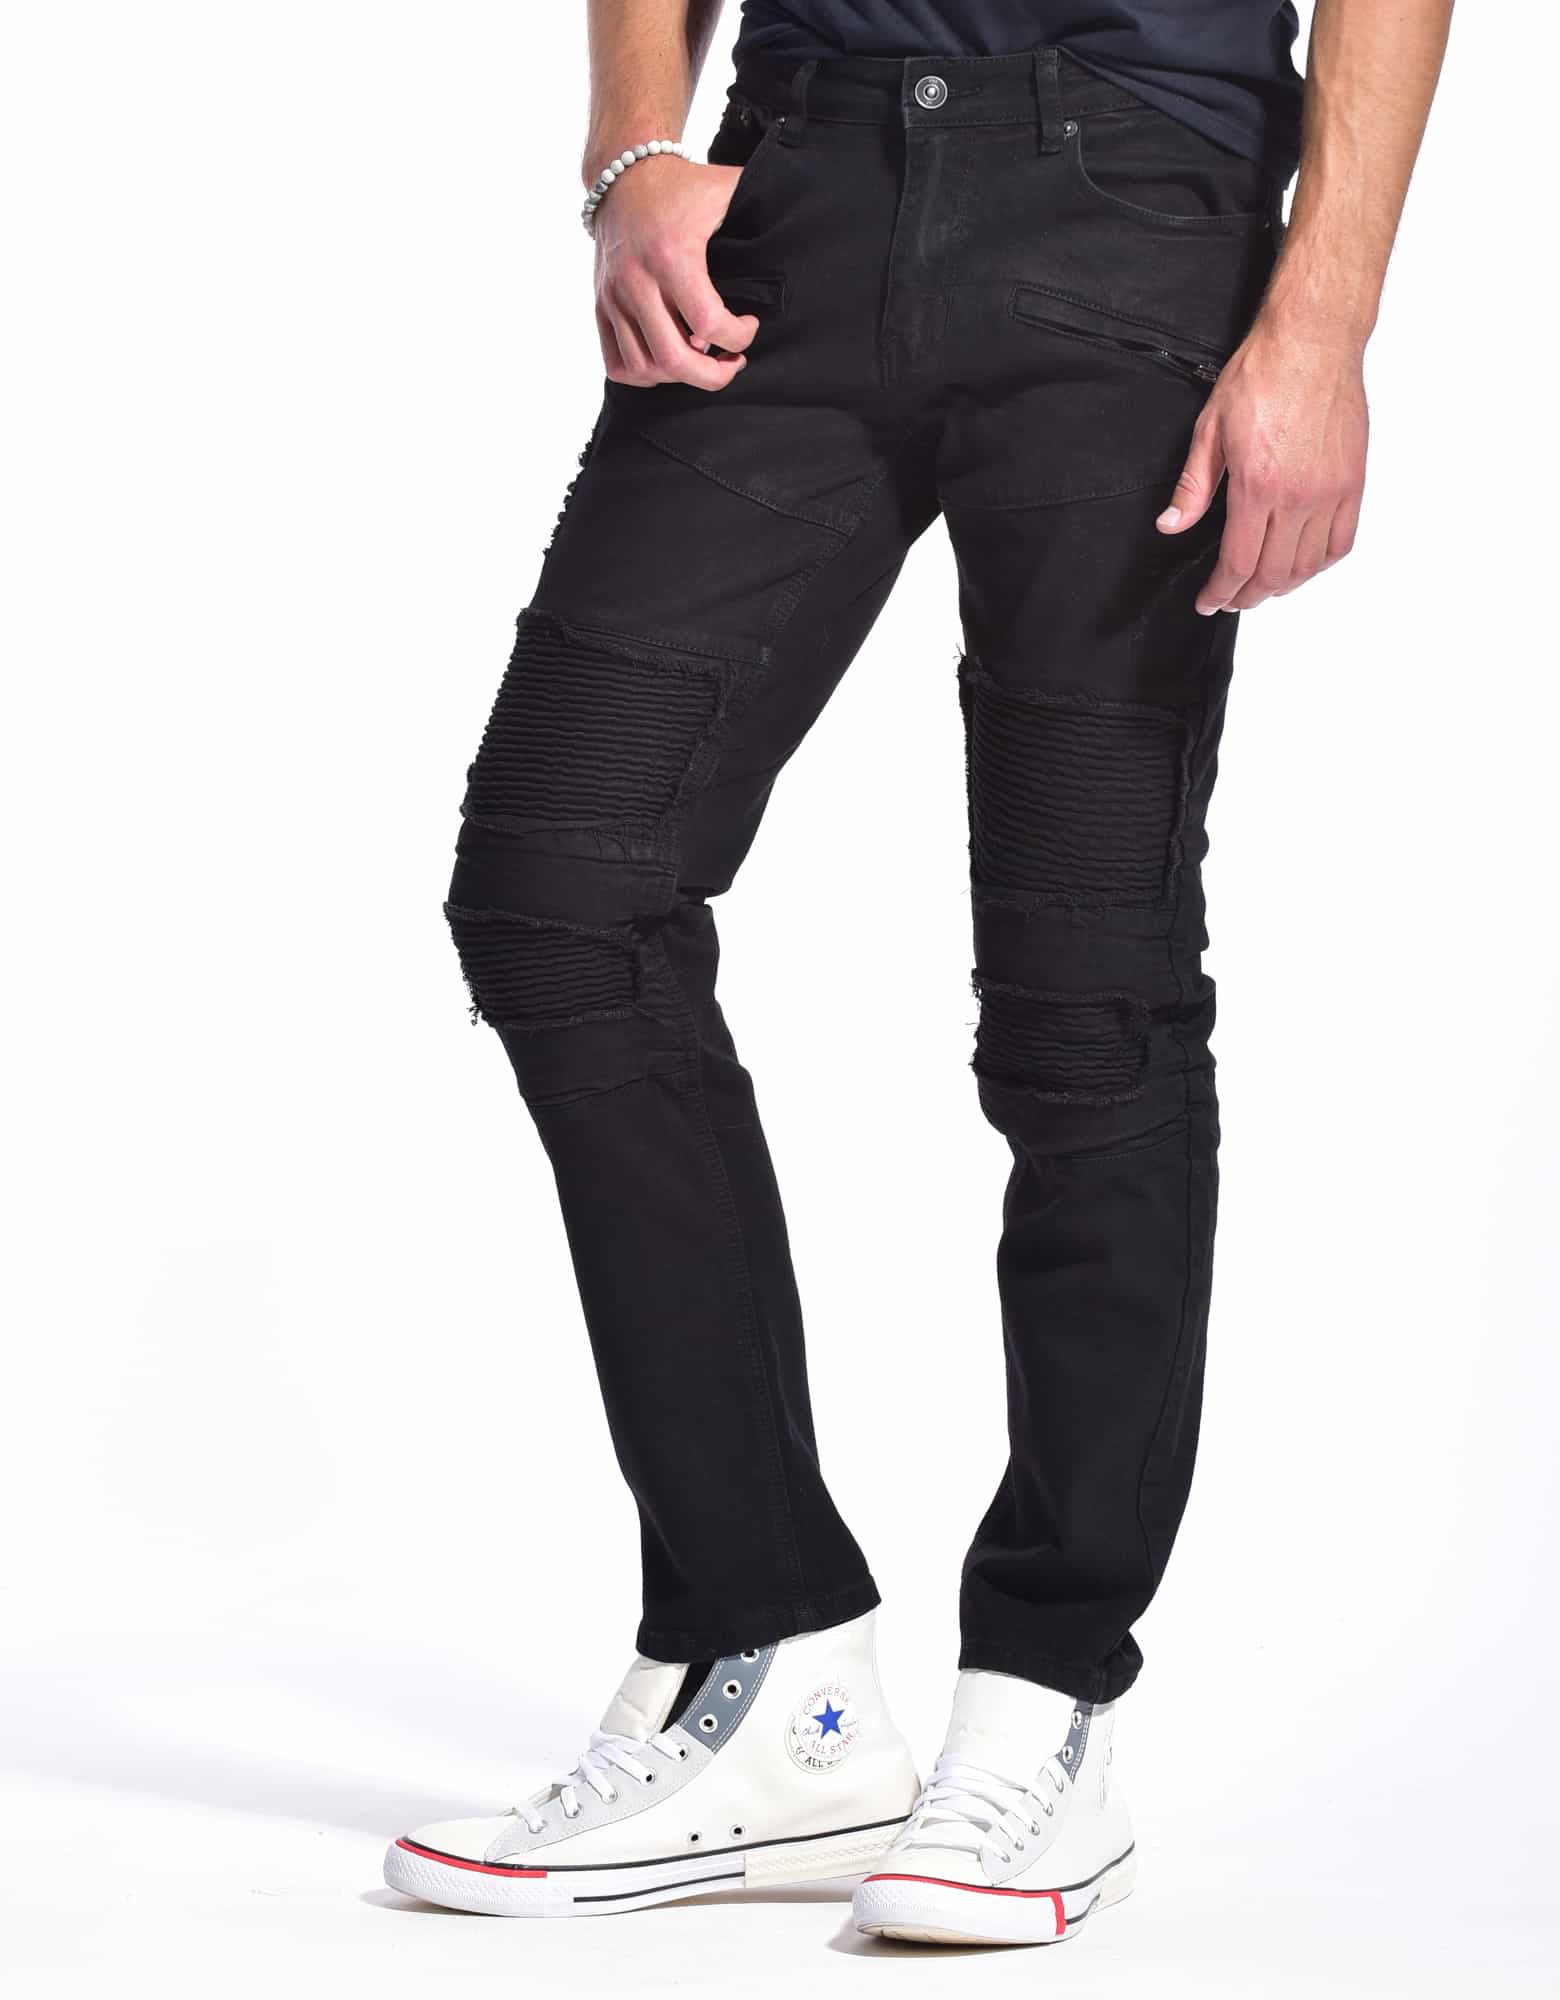 MEN'S MAMMOTH FIVE POCKETS MOTO SLIM FIT JEANS - image 4 of 11